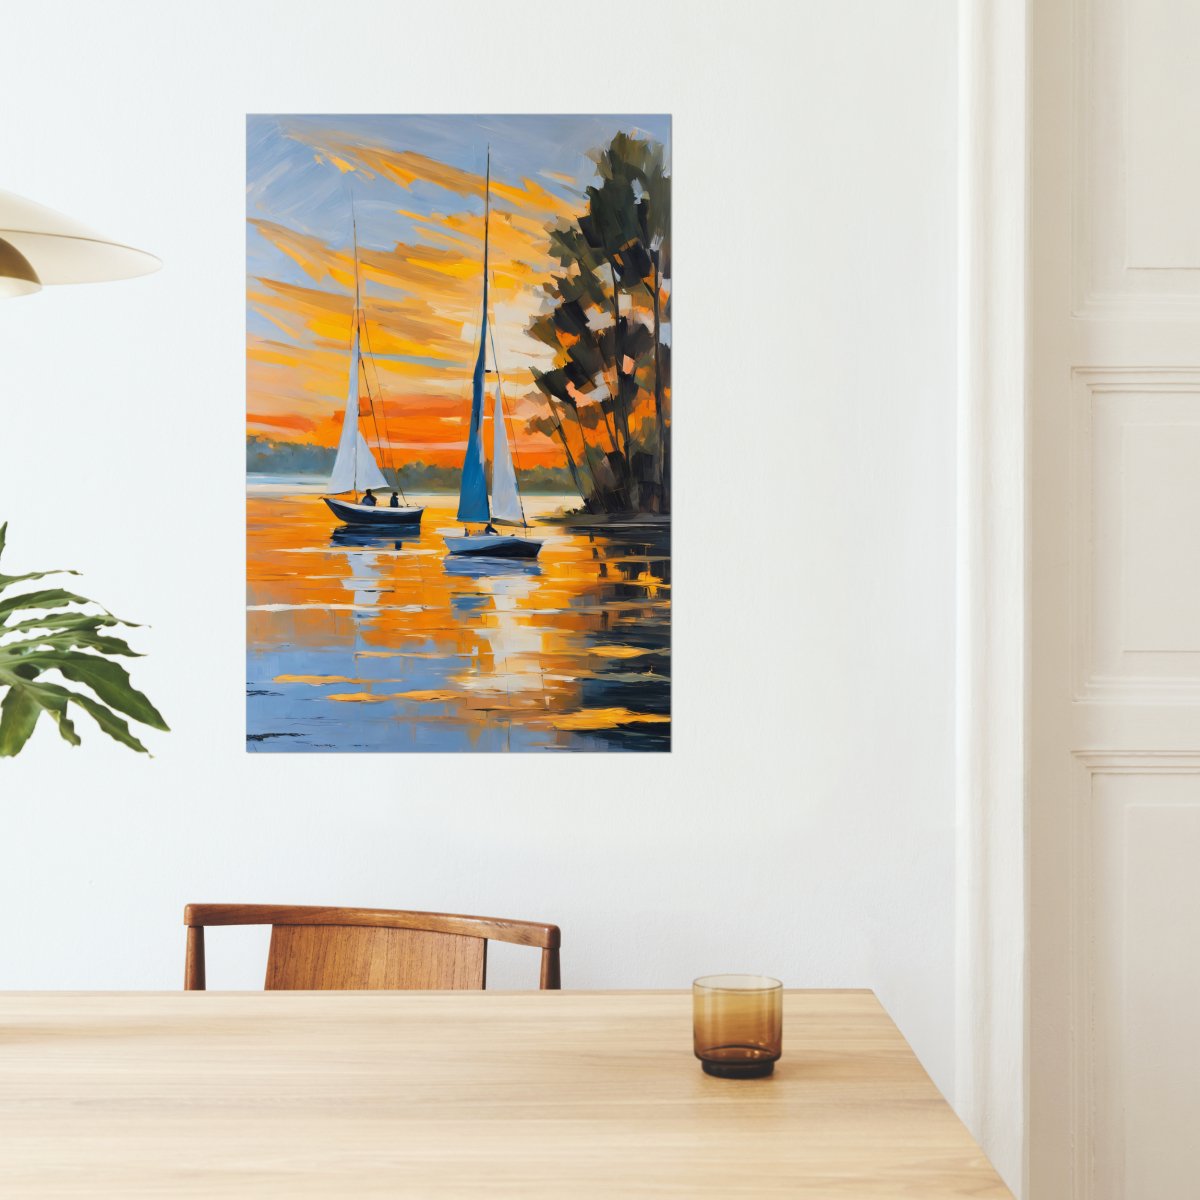 Sunset sails - Art print - Poster - Ever colorful